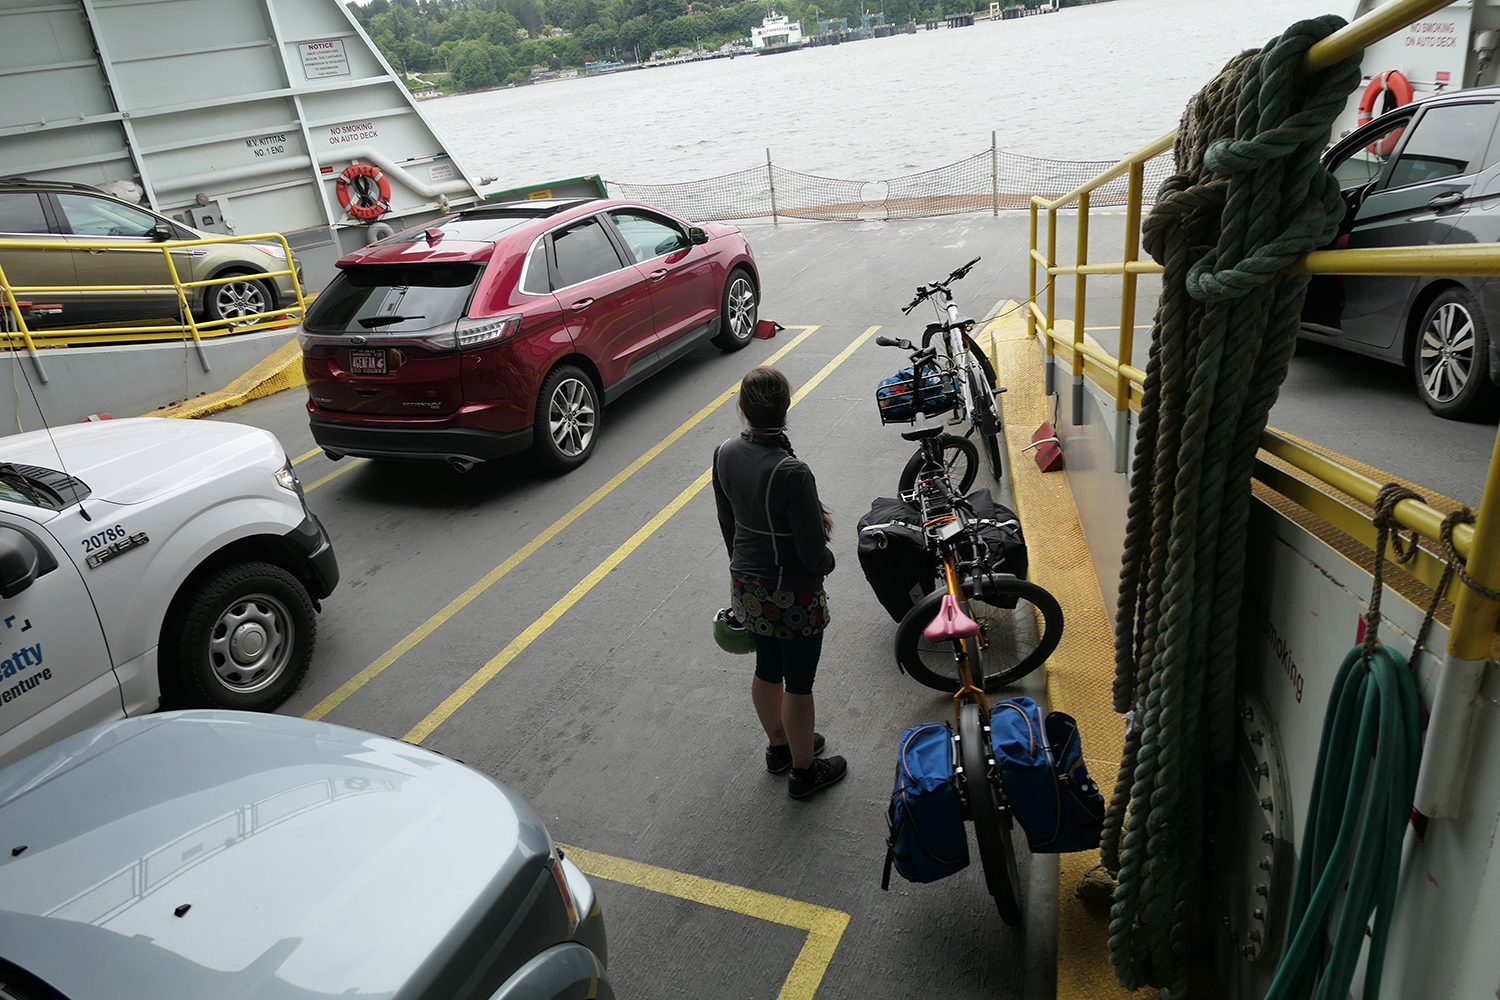 On the ferry with their ebikes to start their weekend tour